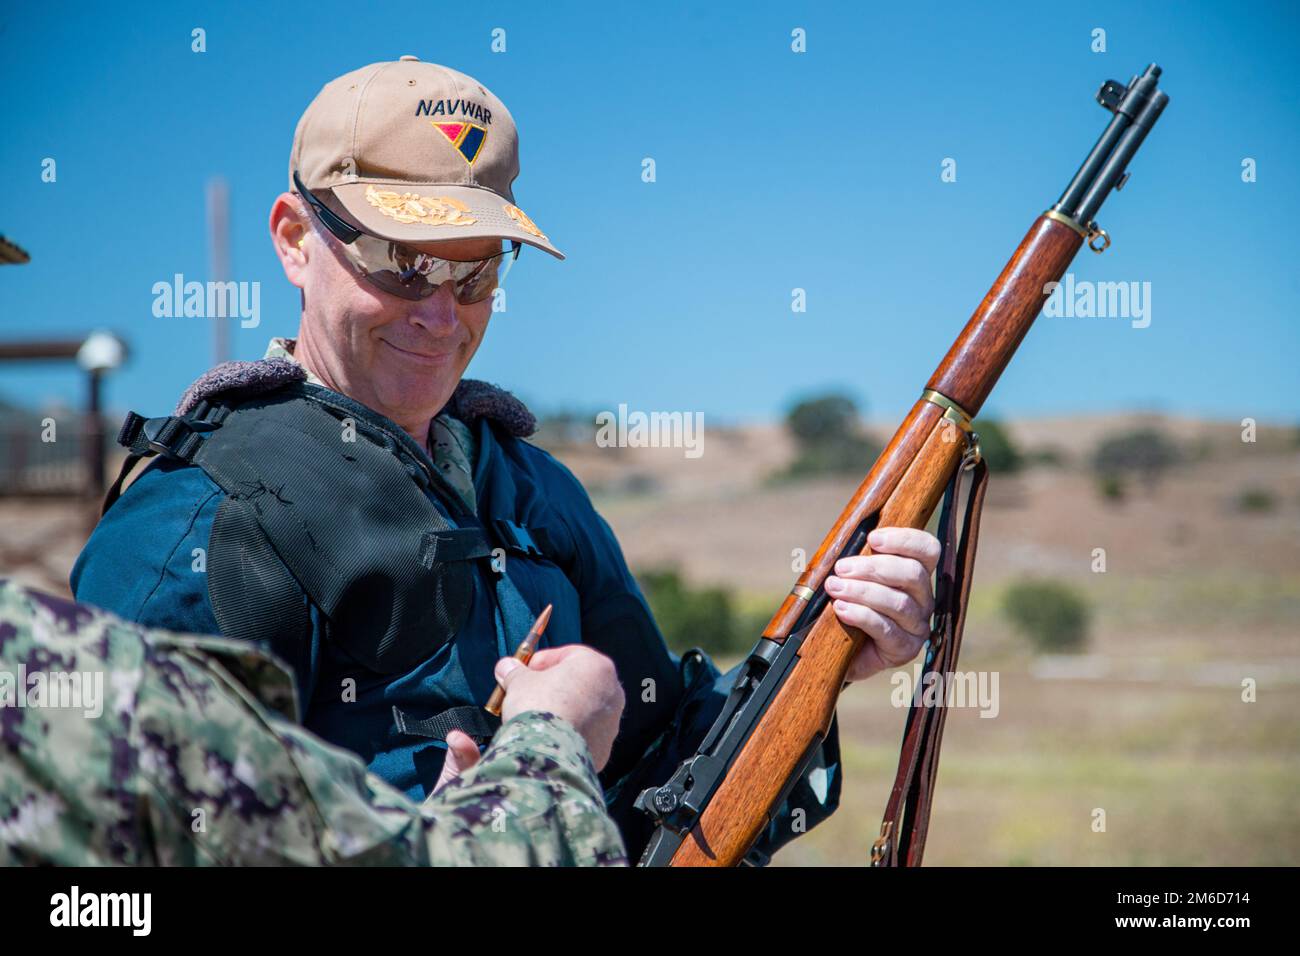 U.S. Navy Rear Adm. Douglas Small, the commander of Naval Information Warfare Systems Command, prepares to insert a round into an M1 Garand rifle for the first shot to kick off the Fleet Forces Pacific Area Rifle and Pistol Matches at Range 214 on Marine Corps Base Camp Pendleton, California, April 23, 2022. The U.S. Navy Marksmanship Team conducts rifle and pistol matches each year and trains hundreds of sailors in service rifle and pistol marksmanship, small arms safety, and competition rules and procedures. Stock Photo